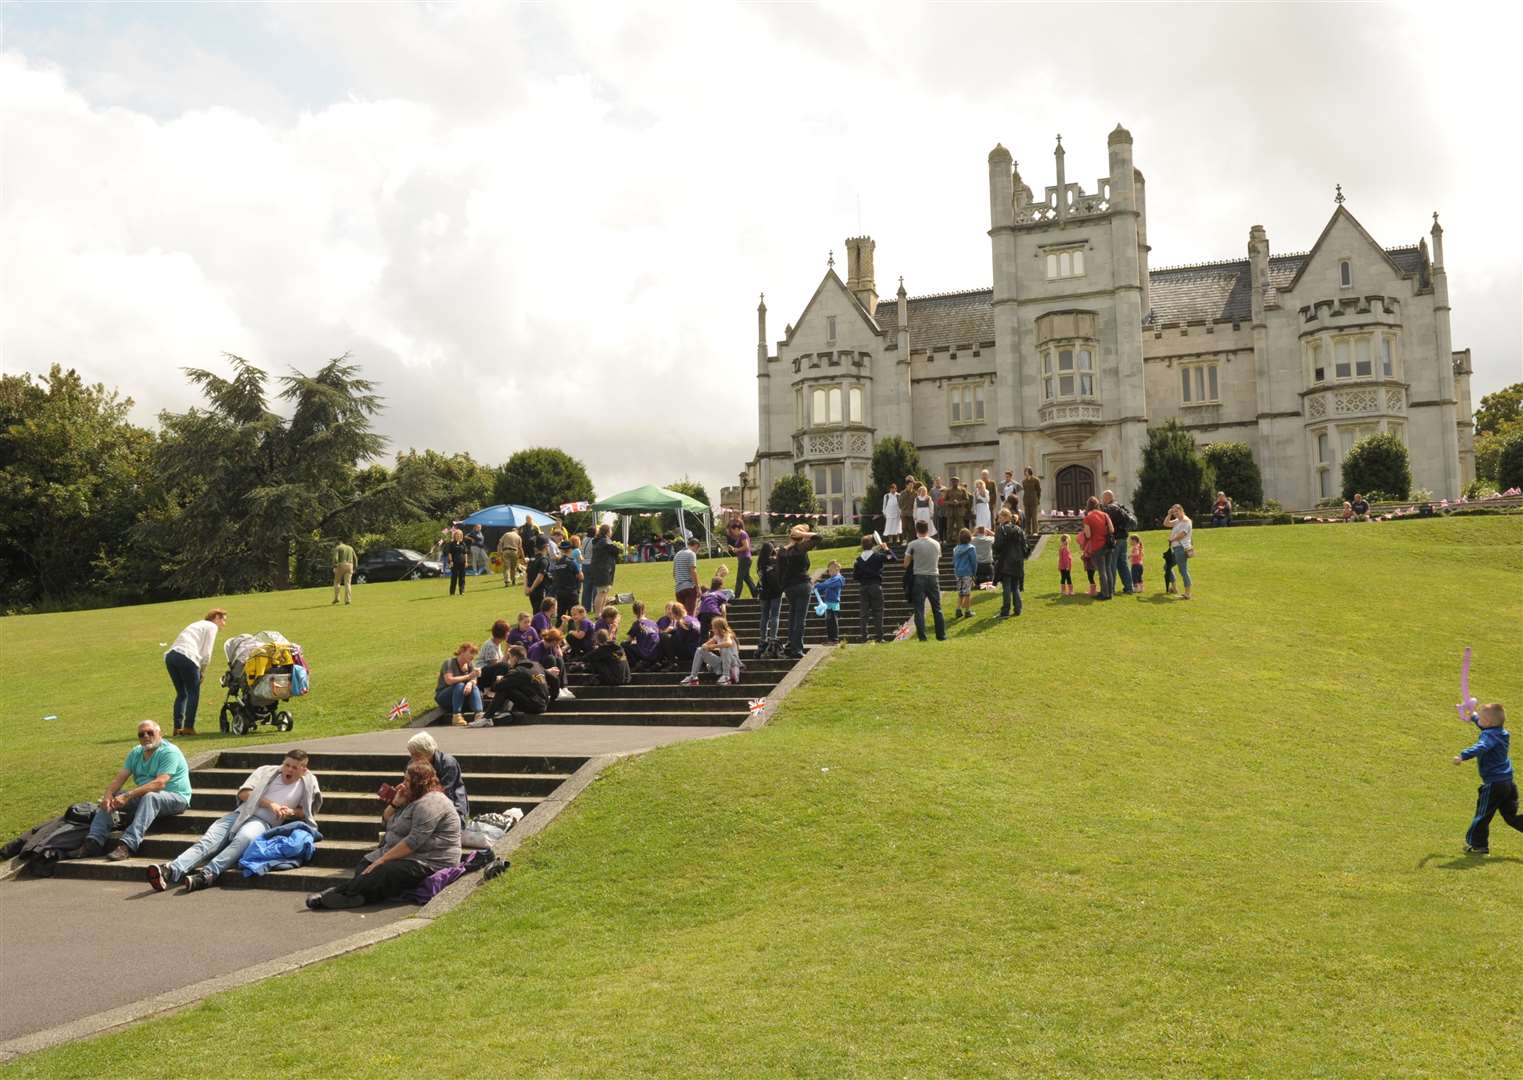 A family fun day held at Ingress Abbey. Picture: Steve Crispe